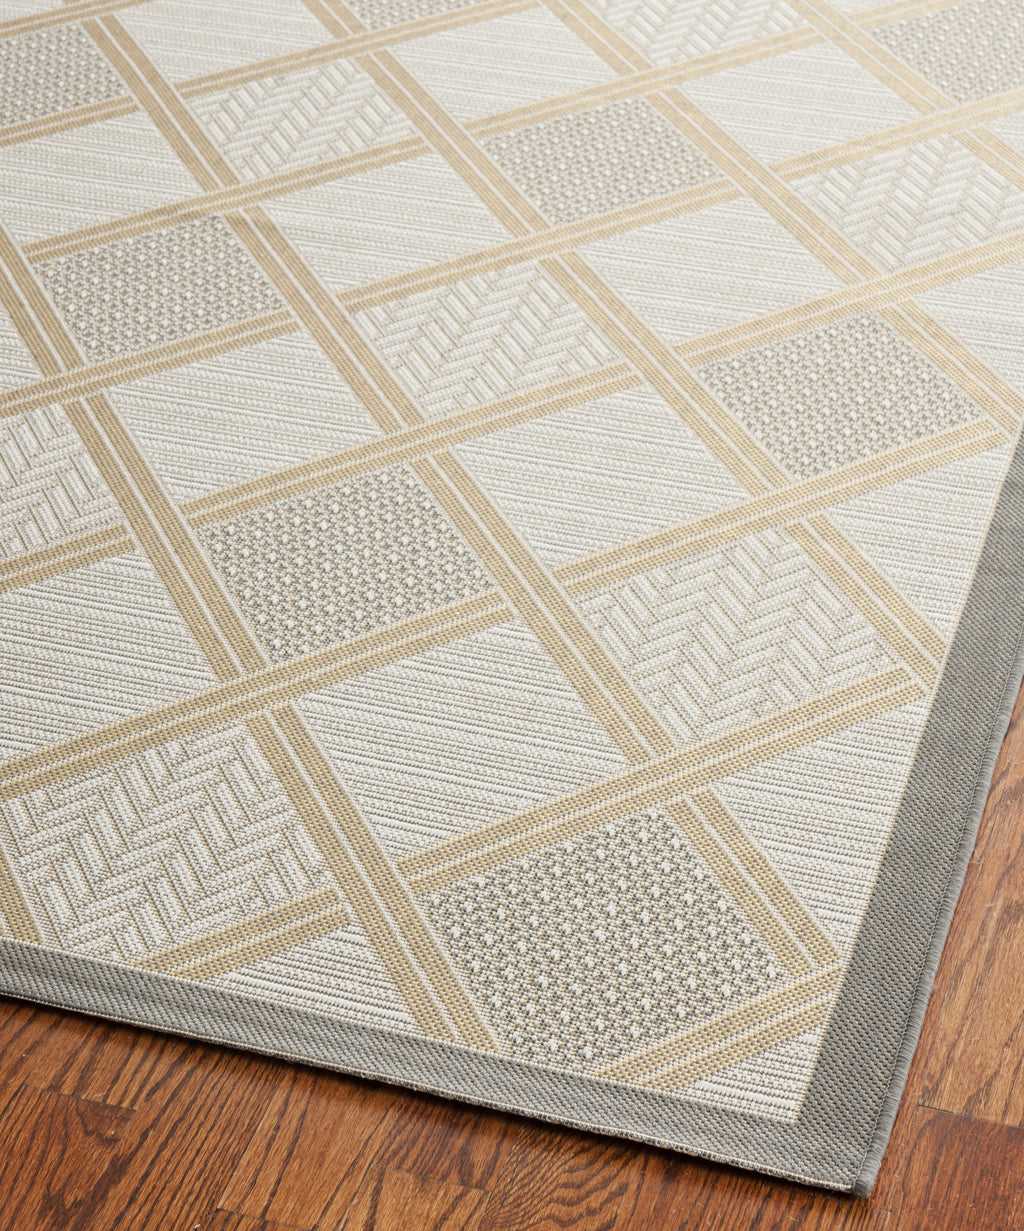 Safavieh Courtyard CY7570 Light Grey/Anthracite Area Rug  Feature